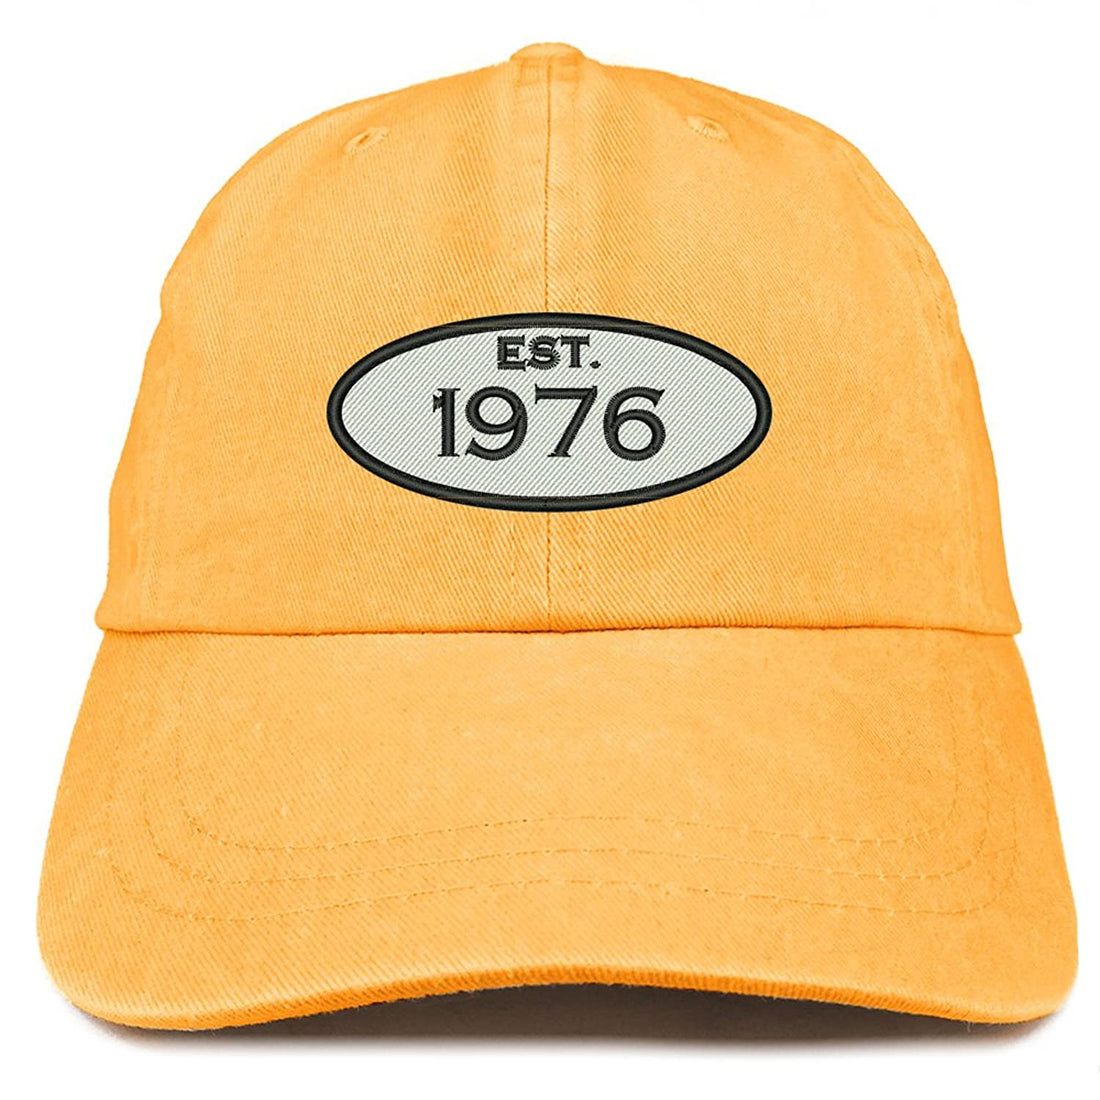 Trendy Apparel Shop Established 1976 Embroidered 42nd Birthday Gift Pigment Dyed Washed Cotton Cap - Mango